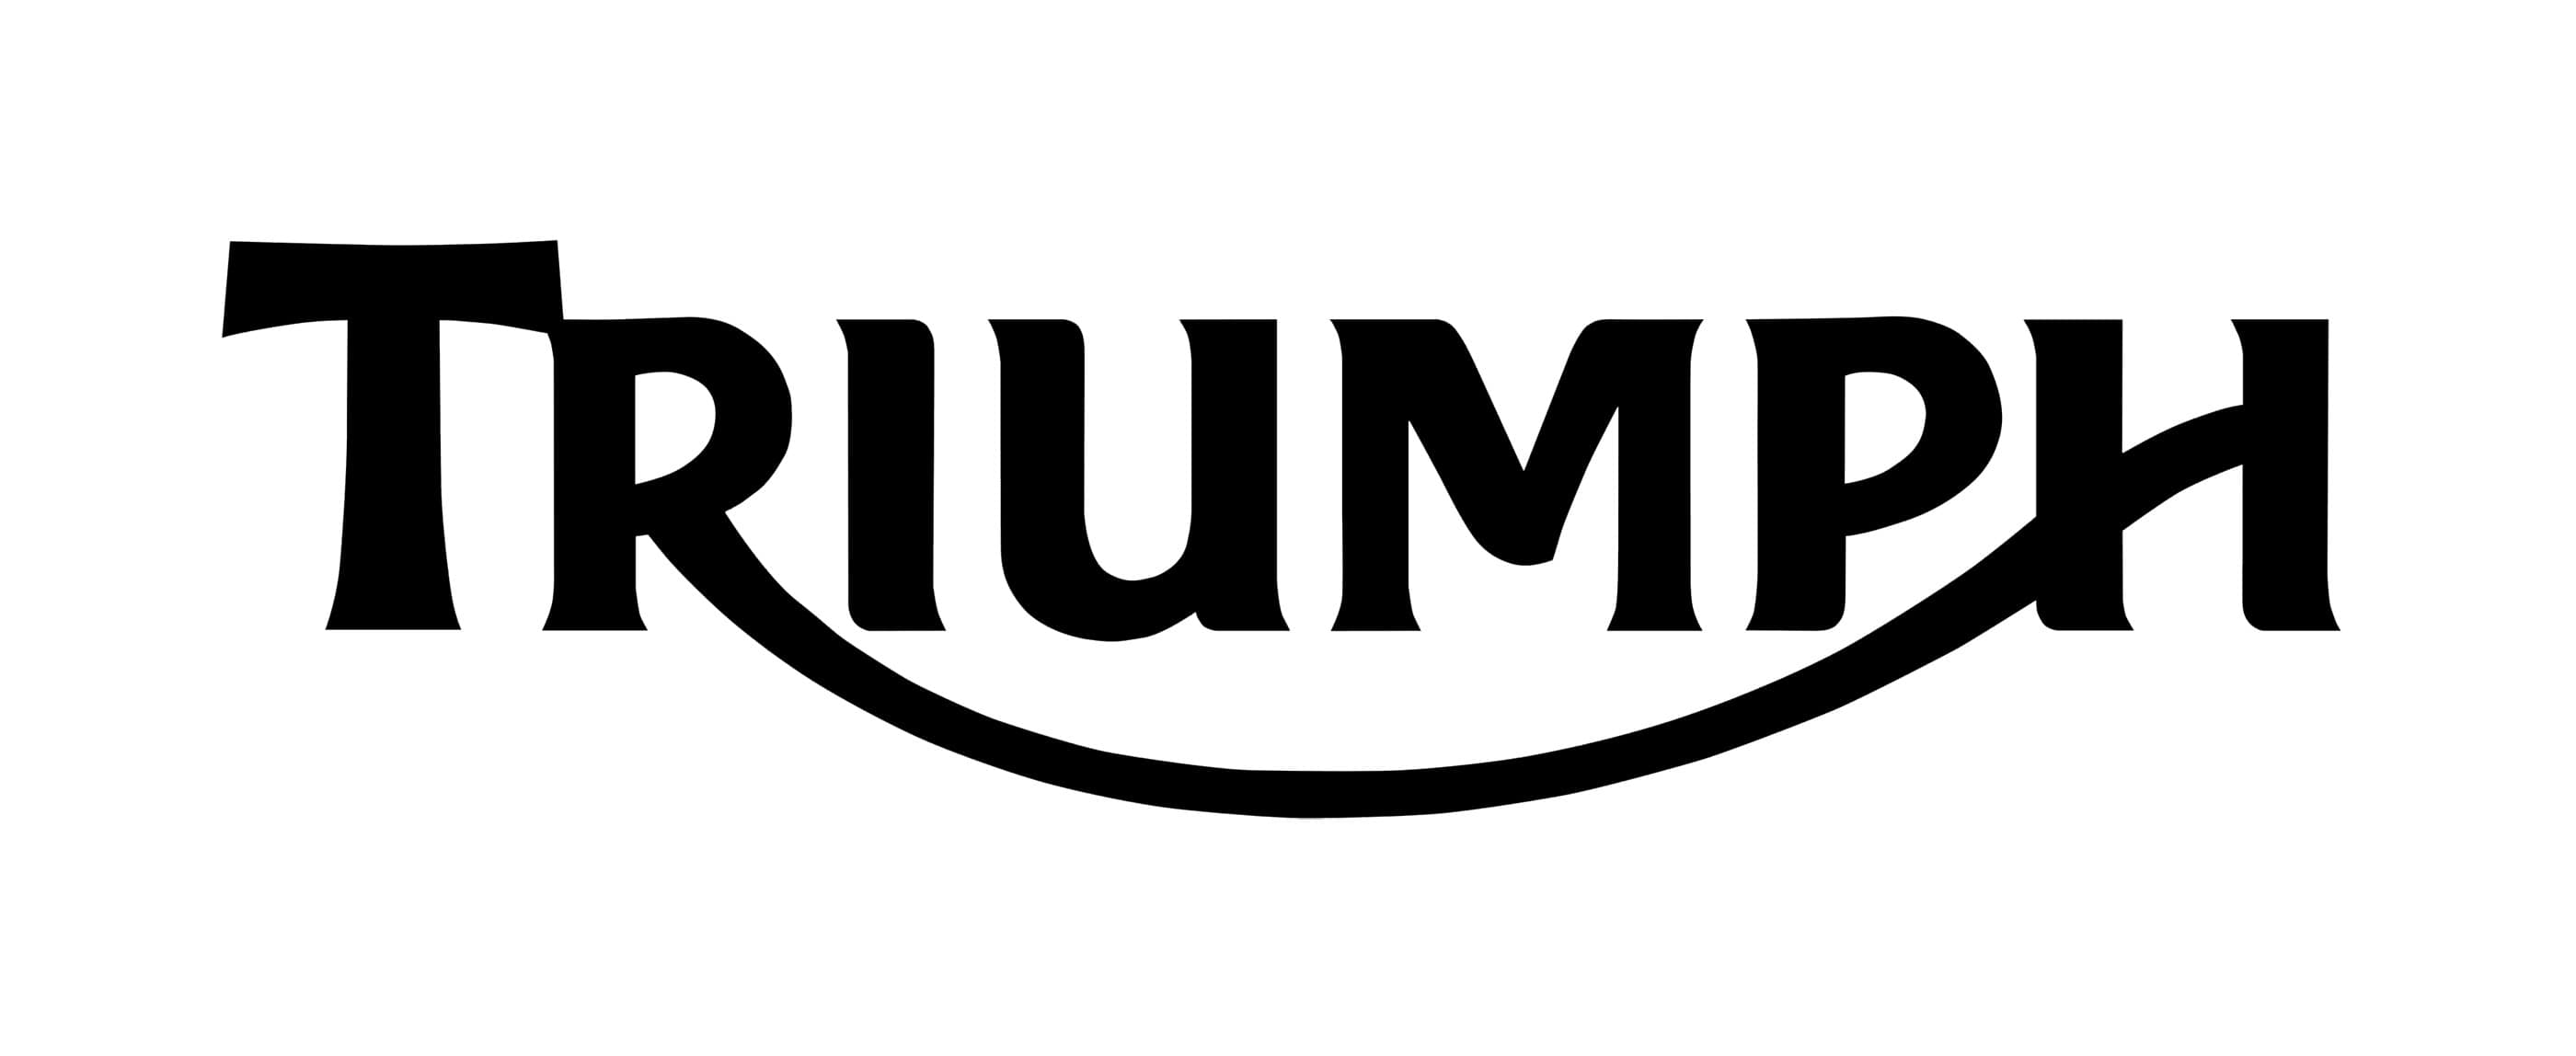 Triumph Motorcycle Logo - Triumph logo: history, evolution, meaning | Motorcycle Brands